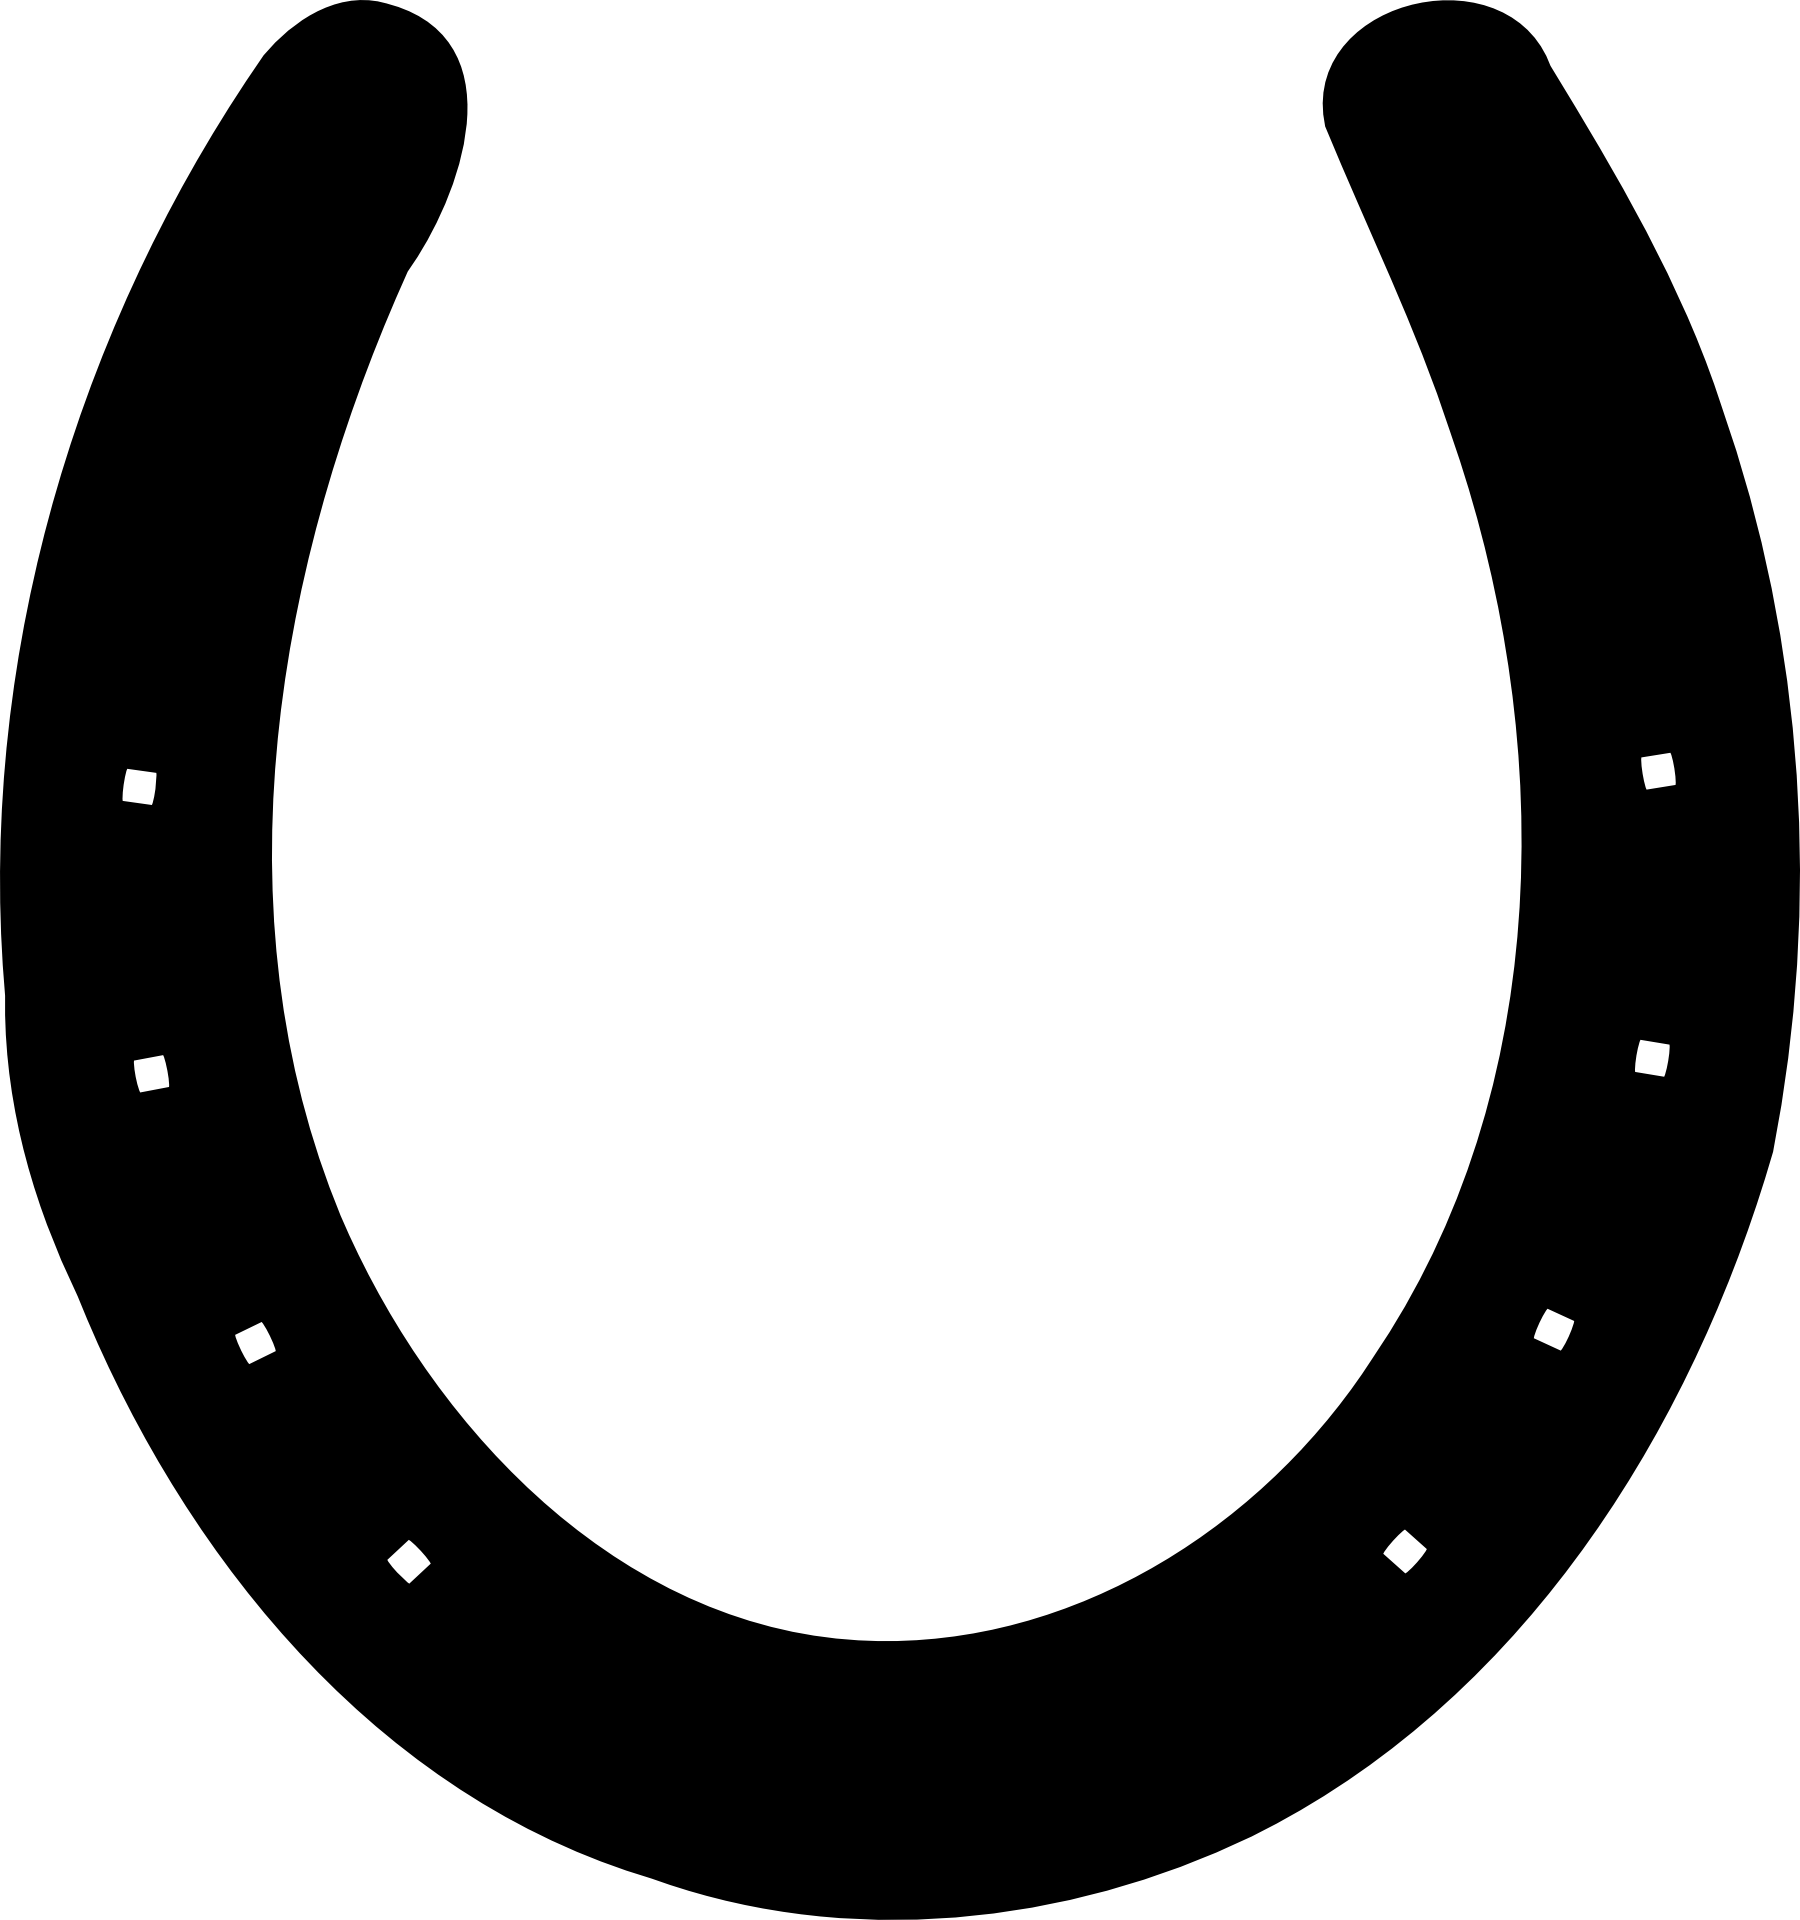 Horseshoe Silhouette Clip art - brow png download - 1800*1920 - Free ...